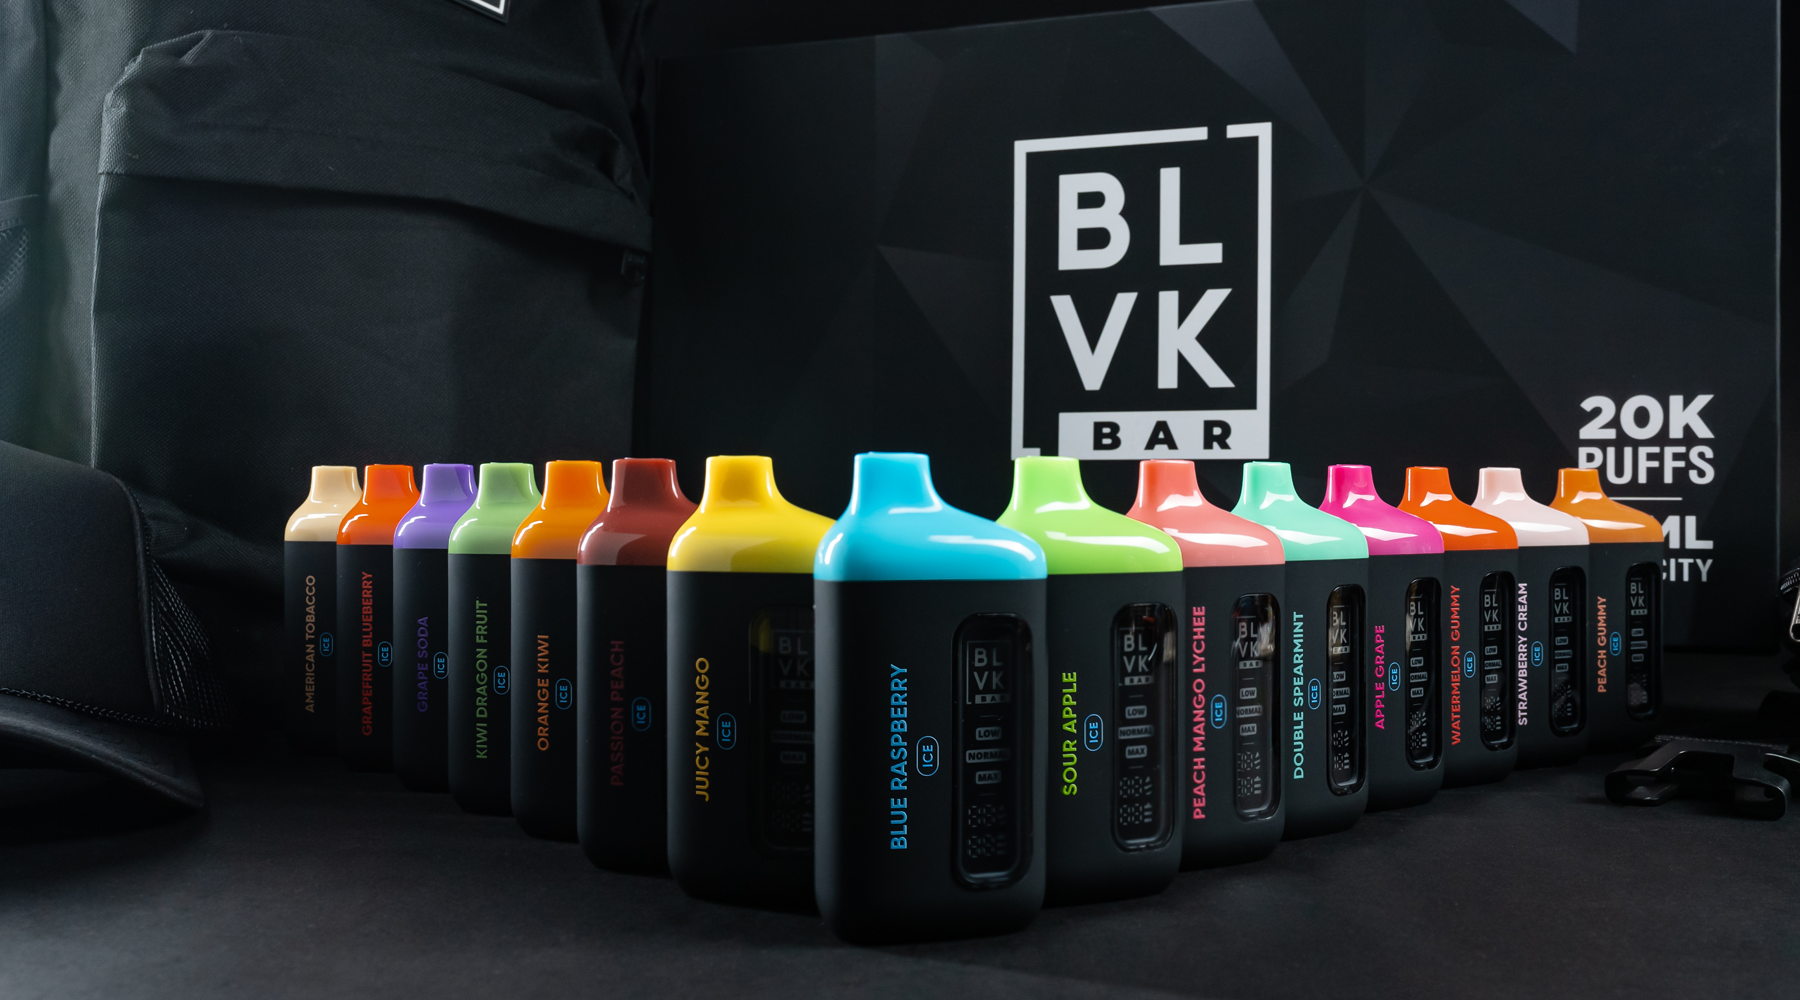 BLVK E-Liquid Launches the BLVK Bar at Total Product Expo